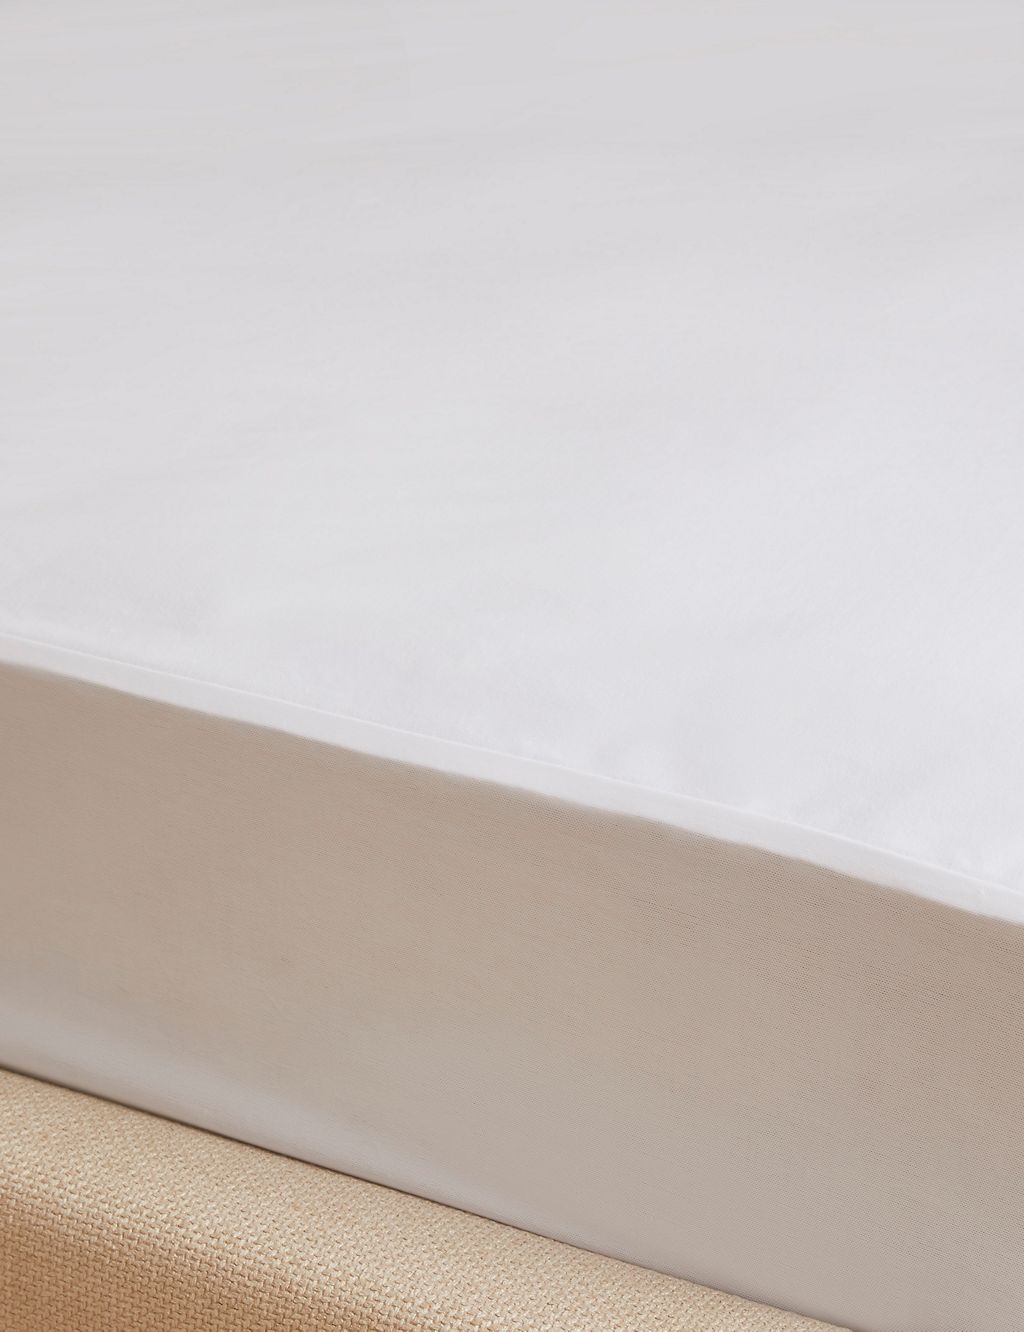 Pure Cotton Jersey Waterproof Mattress Protector 1 of 3